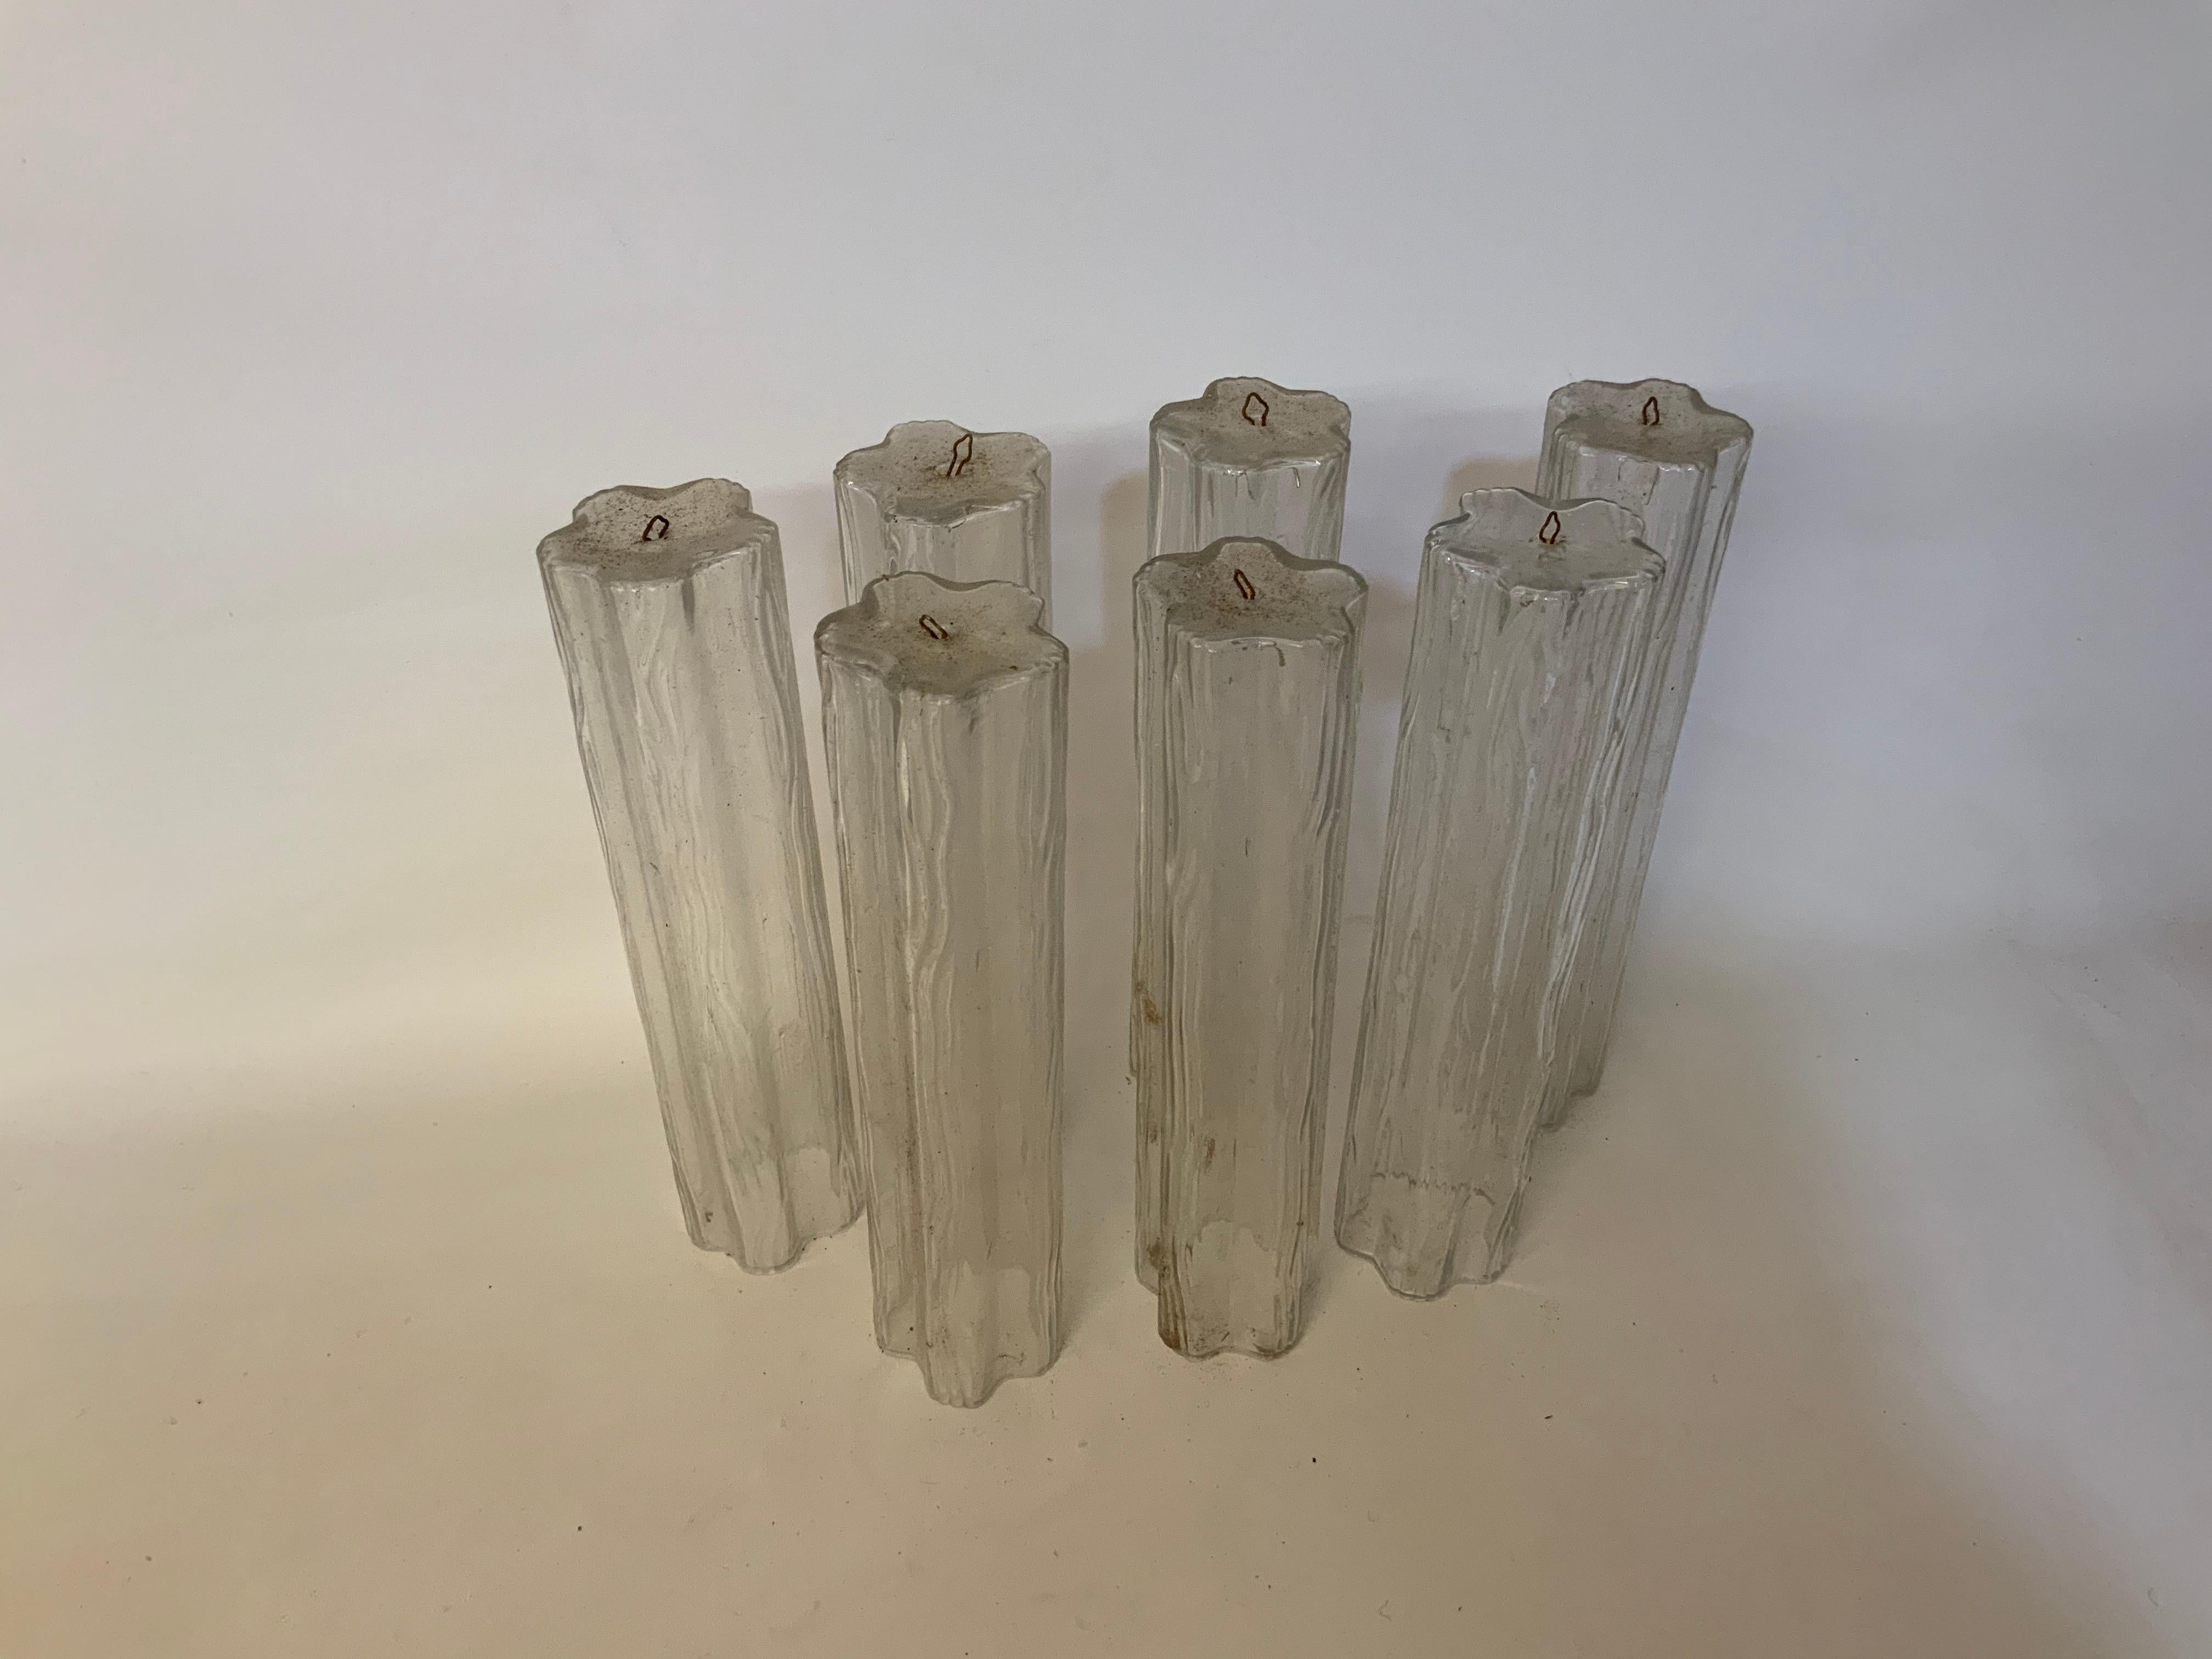 Need extra shades? If you own or are trying to sell one of these signature chandeliers or sconces, then you probably need extra shades. Clear glass, five point drop shade, tree bark texture. All are in good condition, circa 1960-1970.

Each is